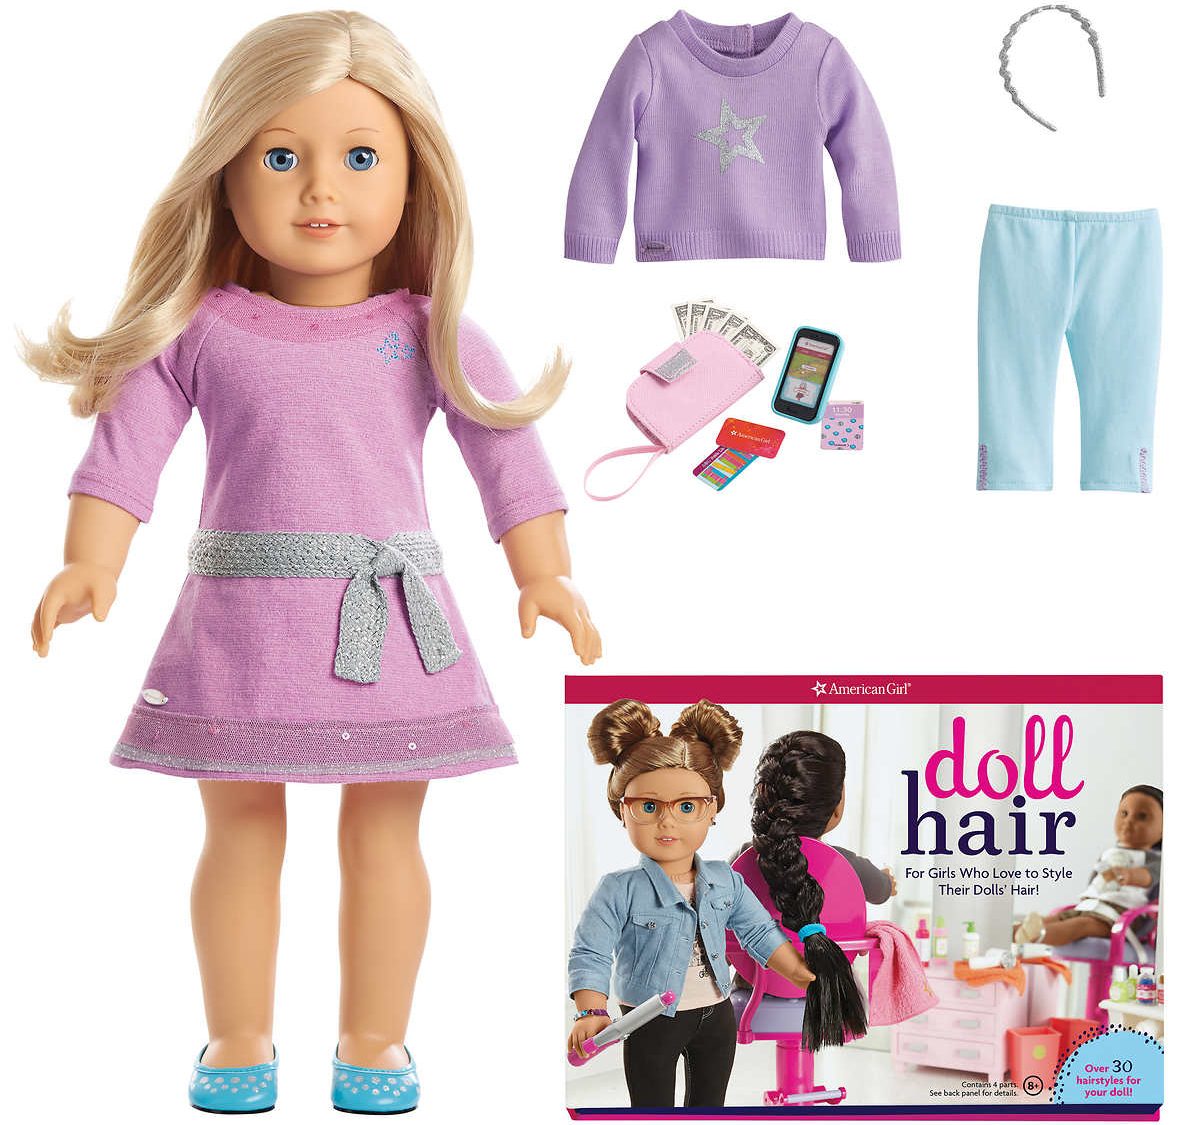 stock images of American Girl Doll with Hair Styling Set contents